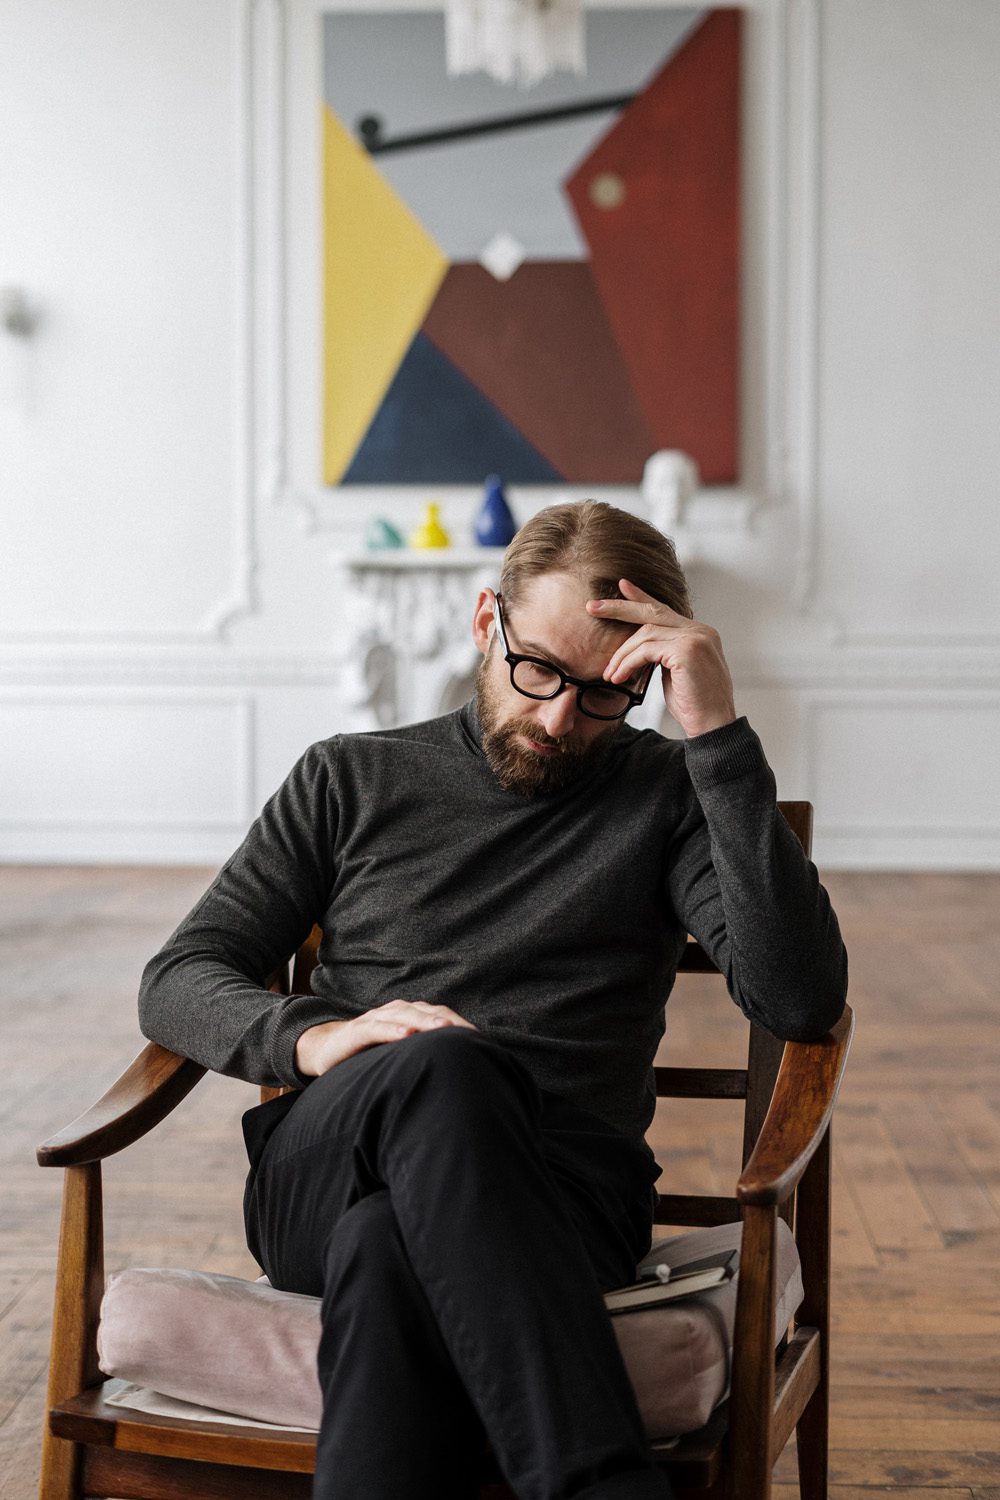 Man in Black Sweater Sitting on Brown Wooden Chair